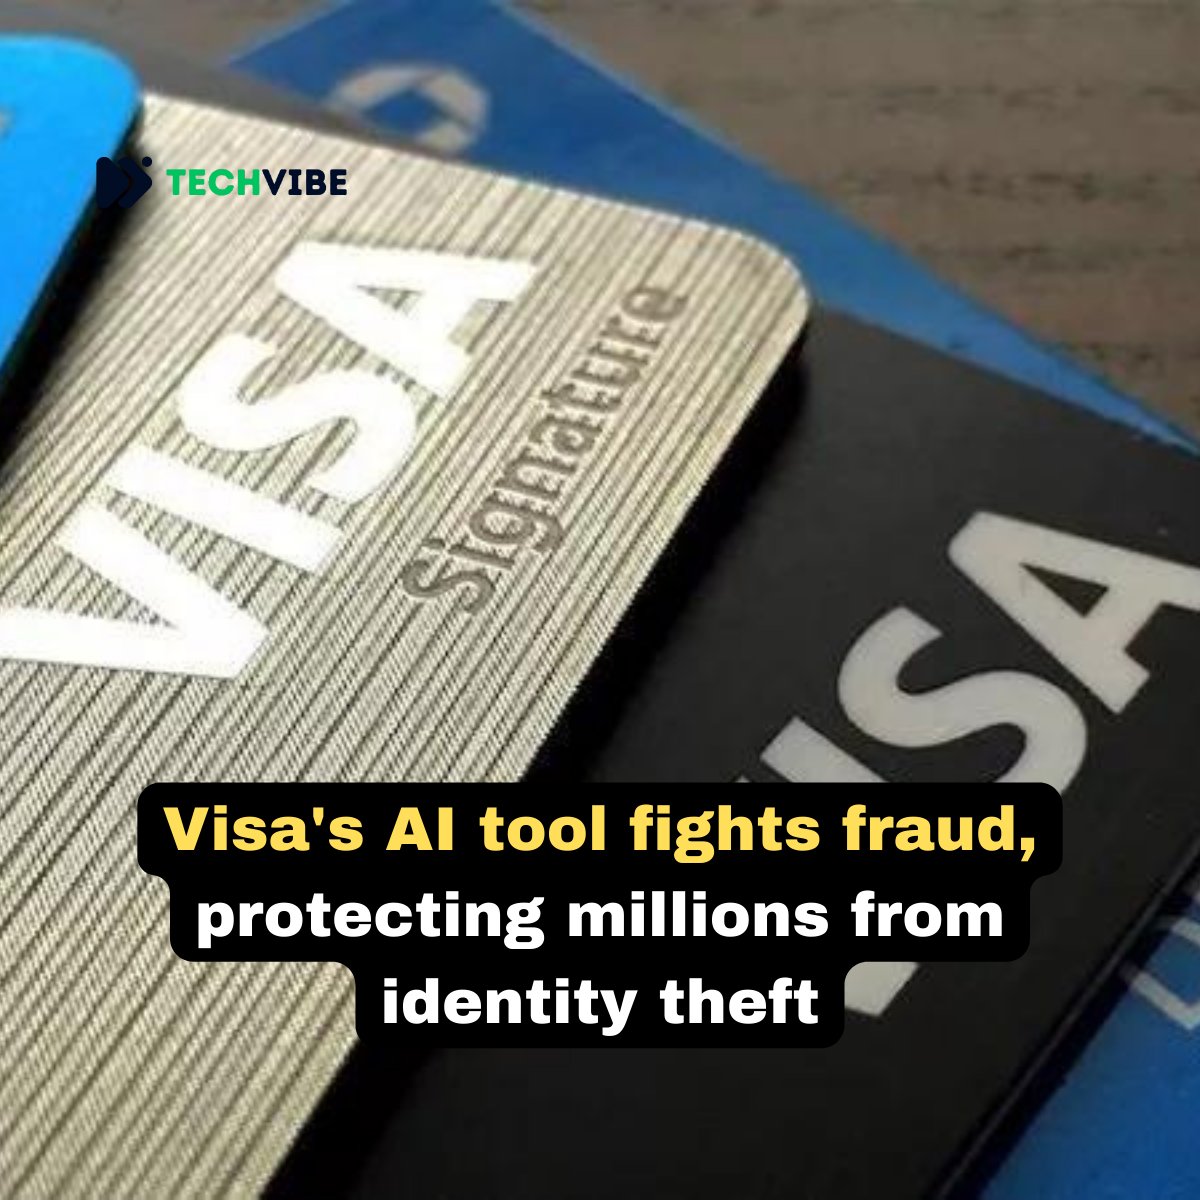 Visa employs advanced AI technology to combat identity theft and financial fraud, safeguarding millions of consumers by analyzing transaction patterns and assigning real-time risk scores to thwart fraudulent activities. more: t.ly/vZjOq #Visa #Fraudsters #AI